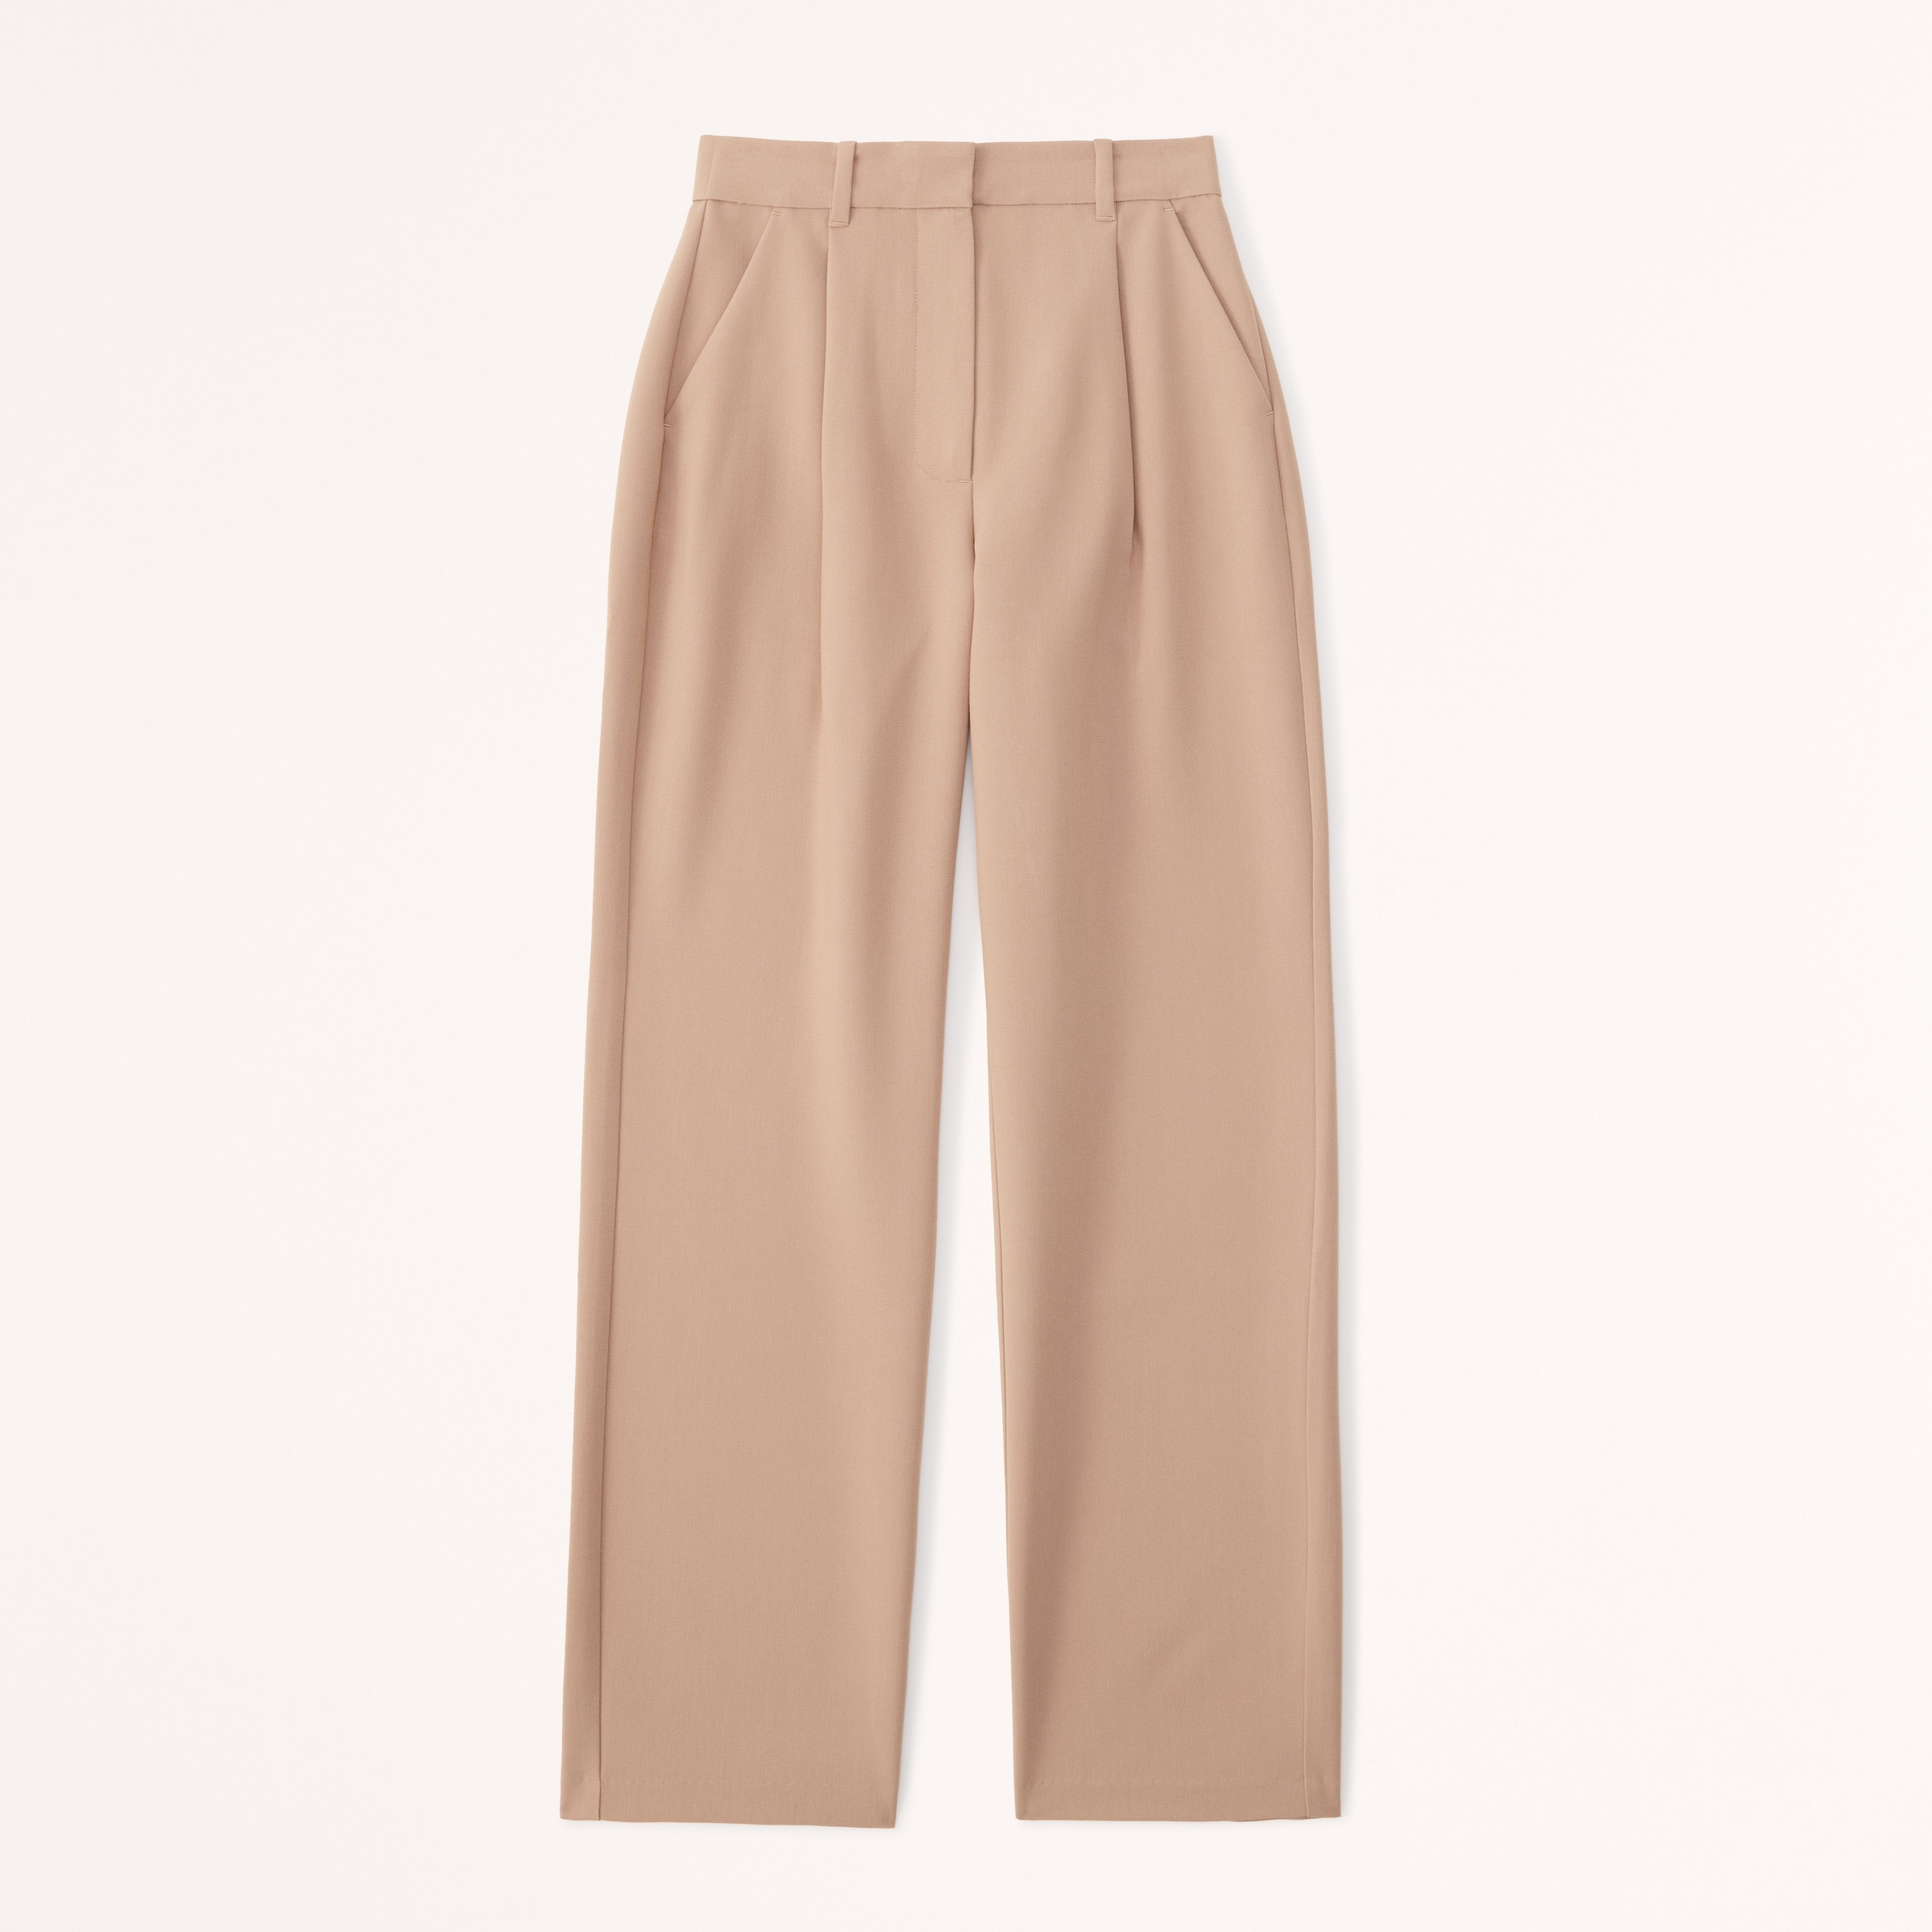 Women's Curve Love Tailored Straight Pant | Women's Bottoms